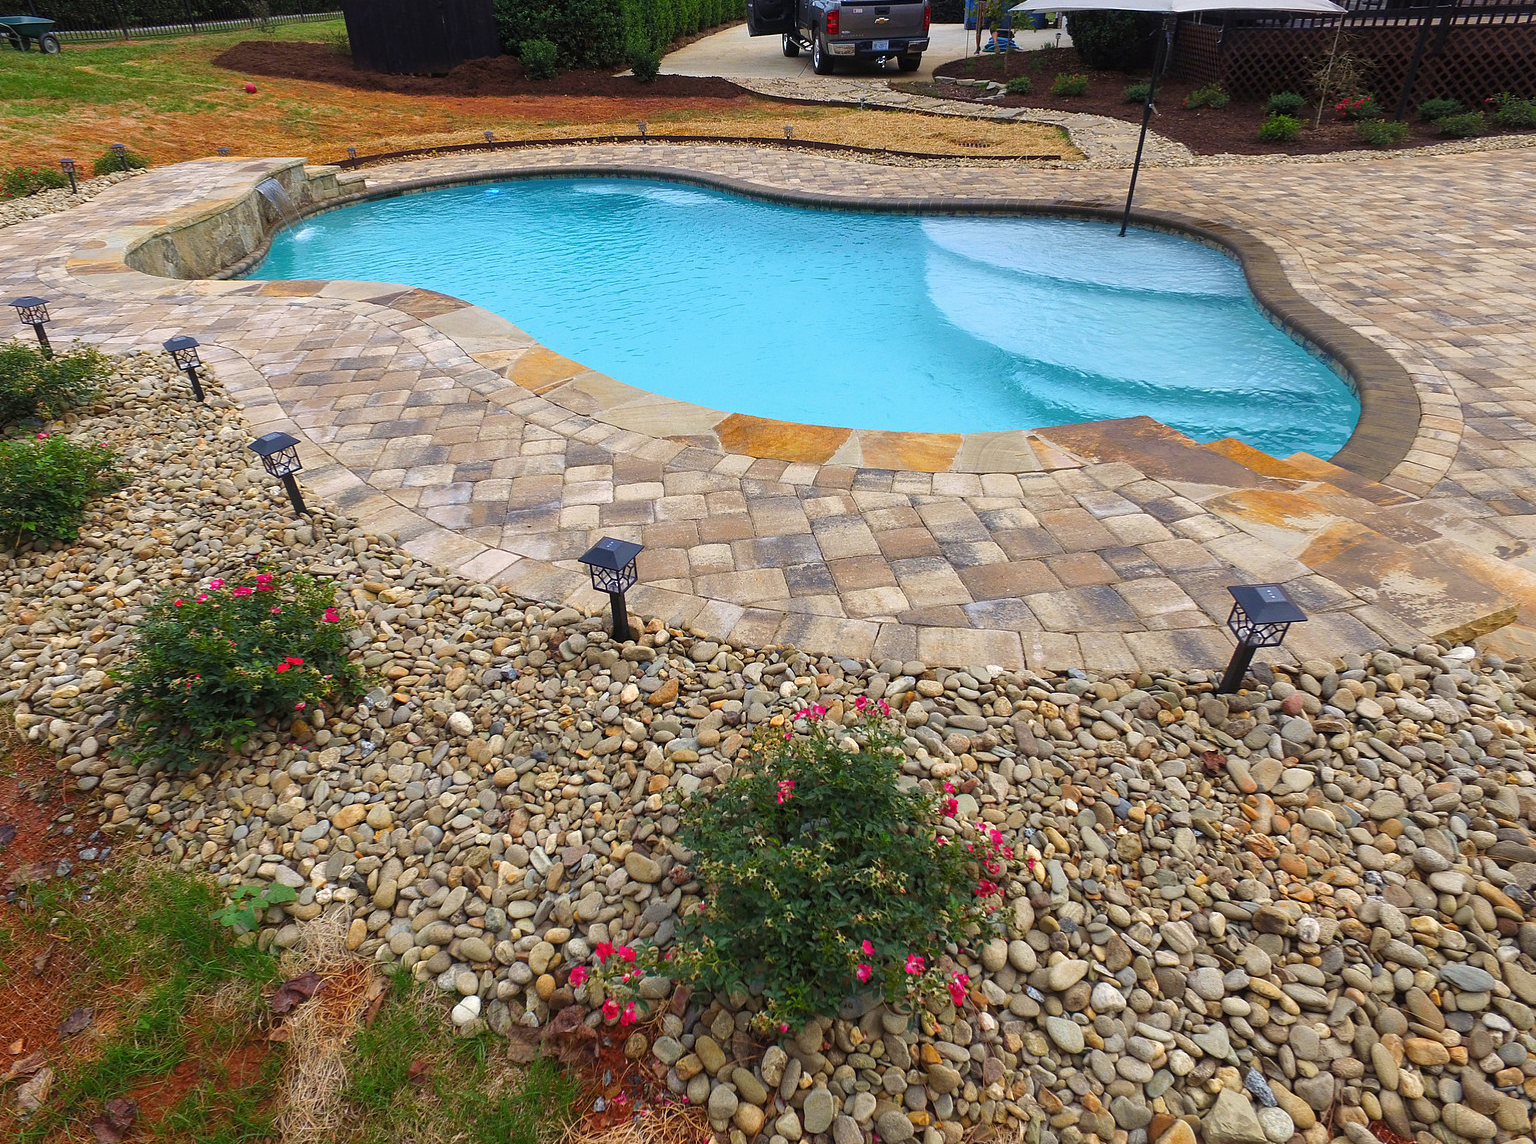 Call CPC Pools at 704-799-5236 for Charlotte North Carolina Inground Concrete Pool Installation